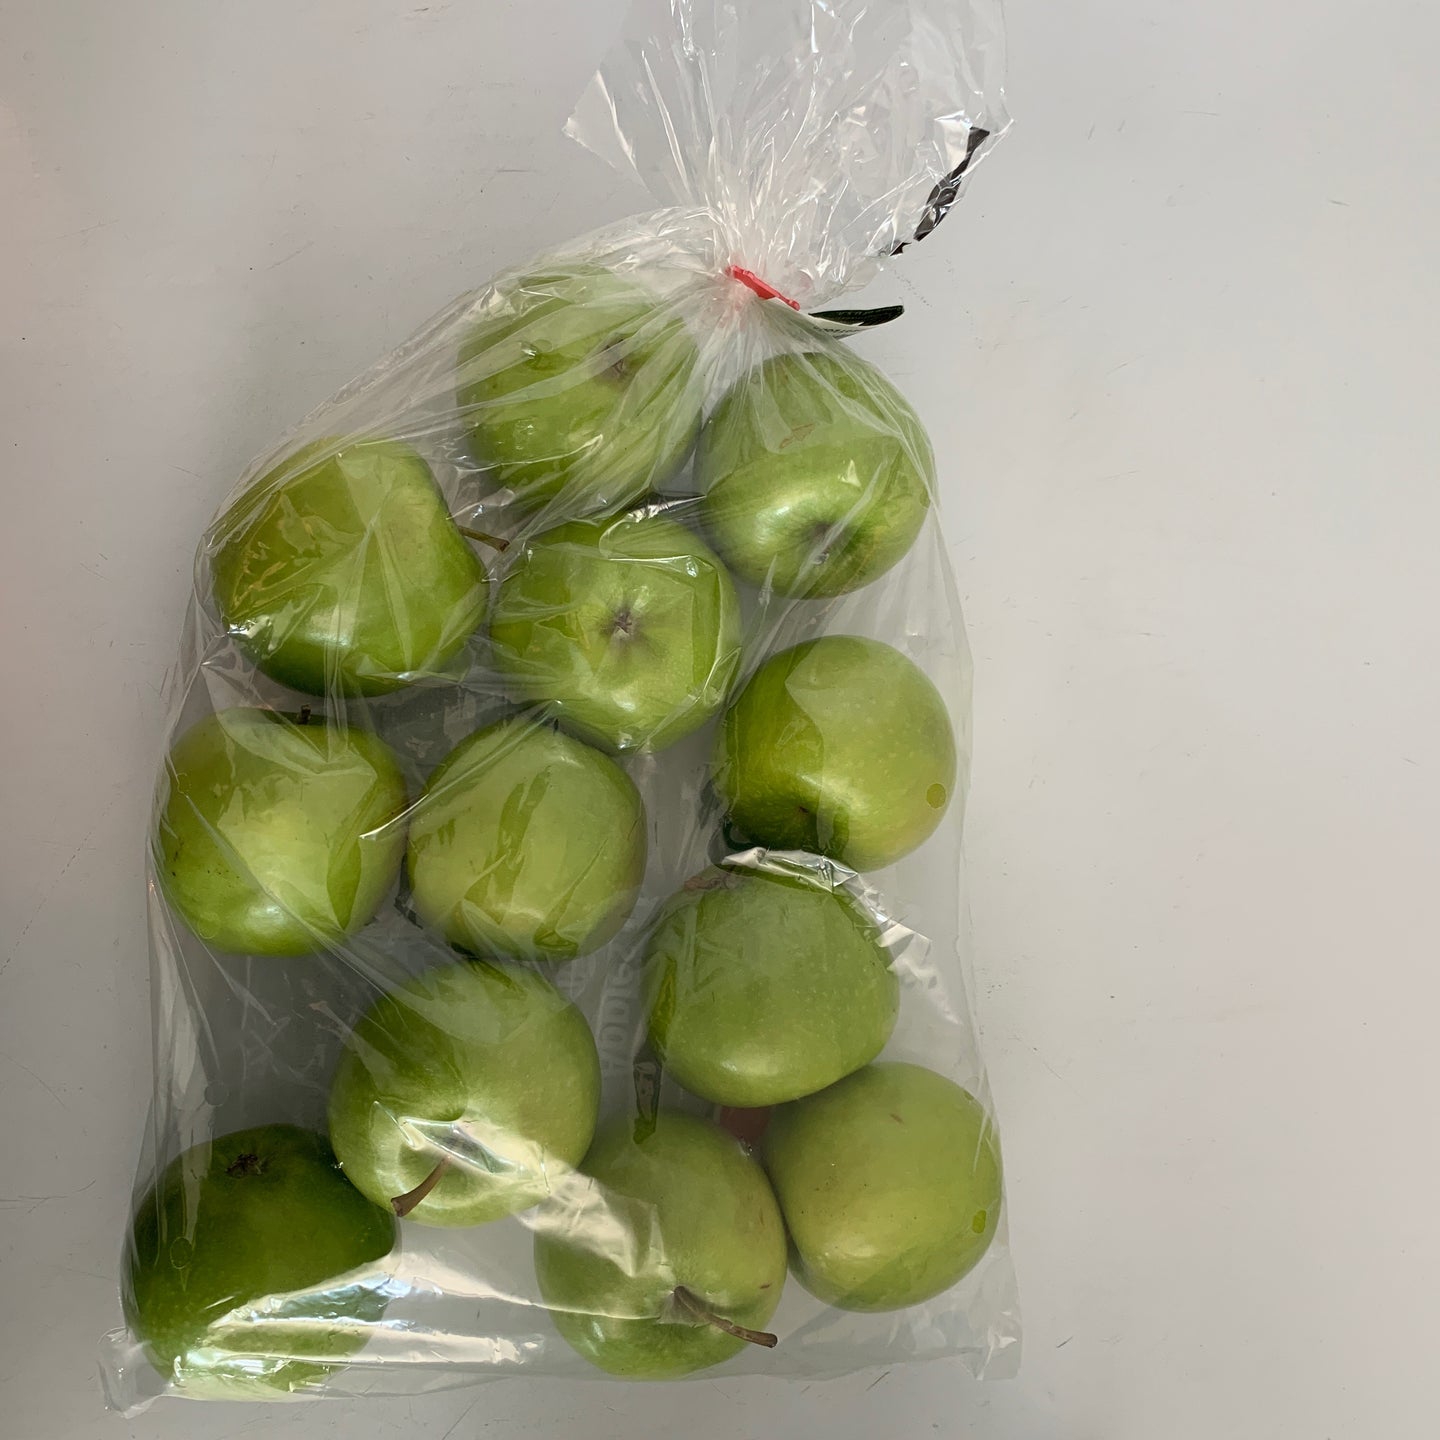 Bag of Granny Smith Apples